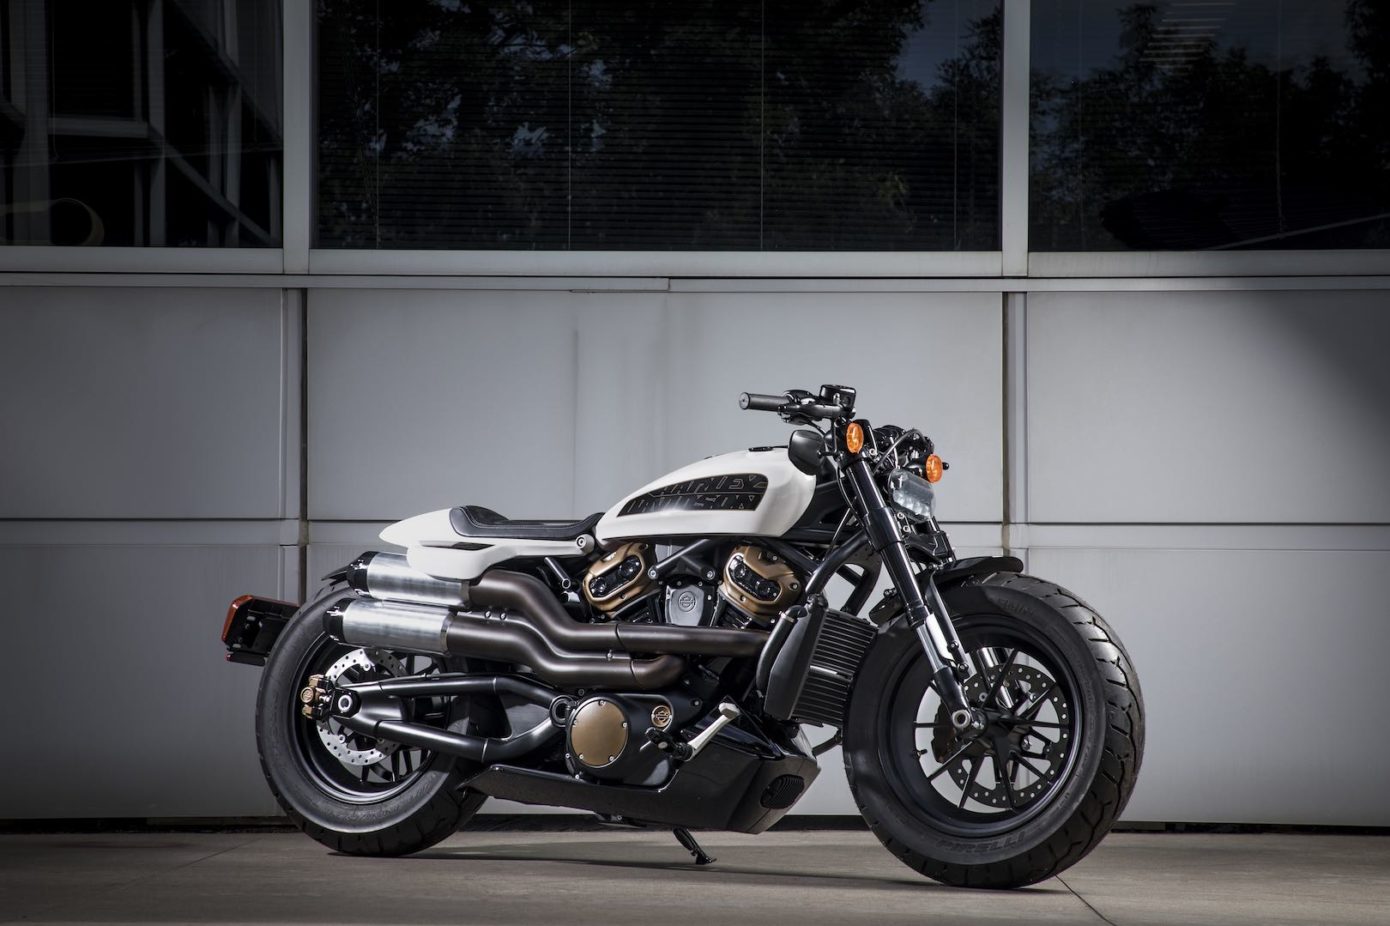 Harley-Davidson’s New Middleweight Engine Detailed In Design Filings